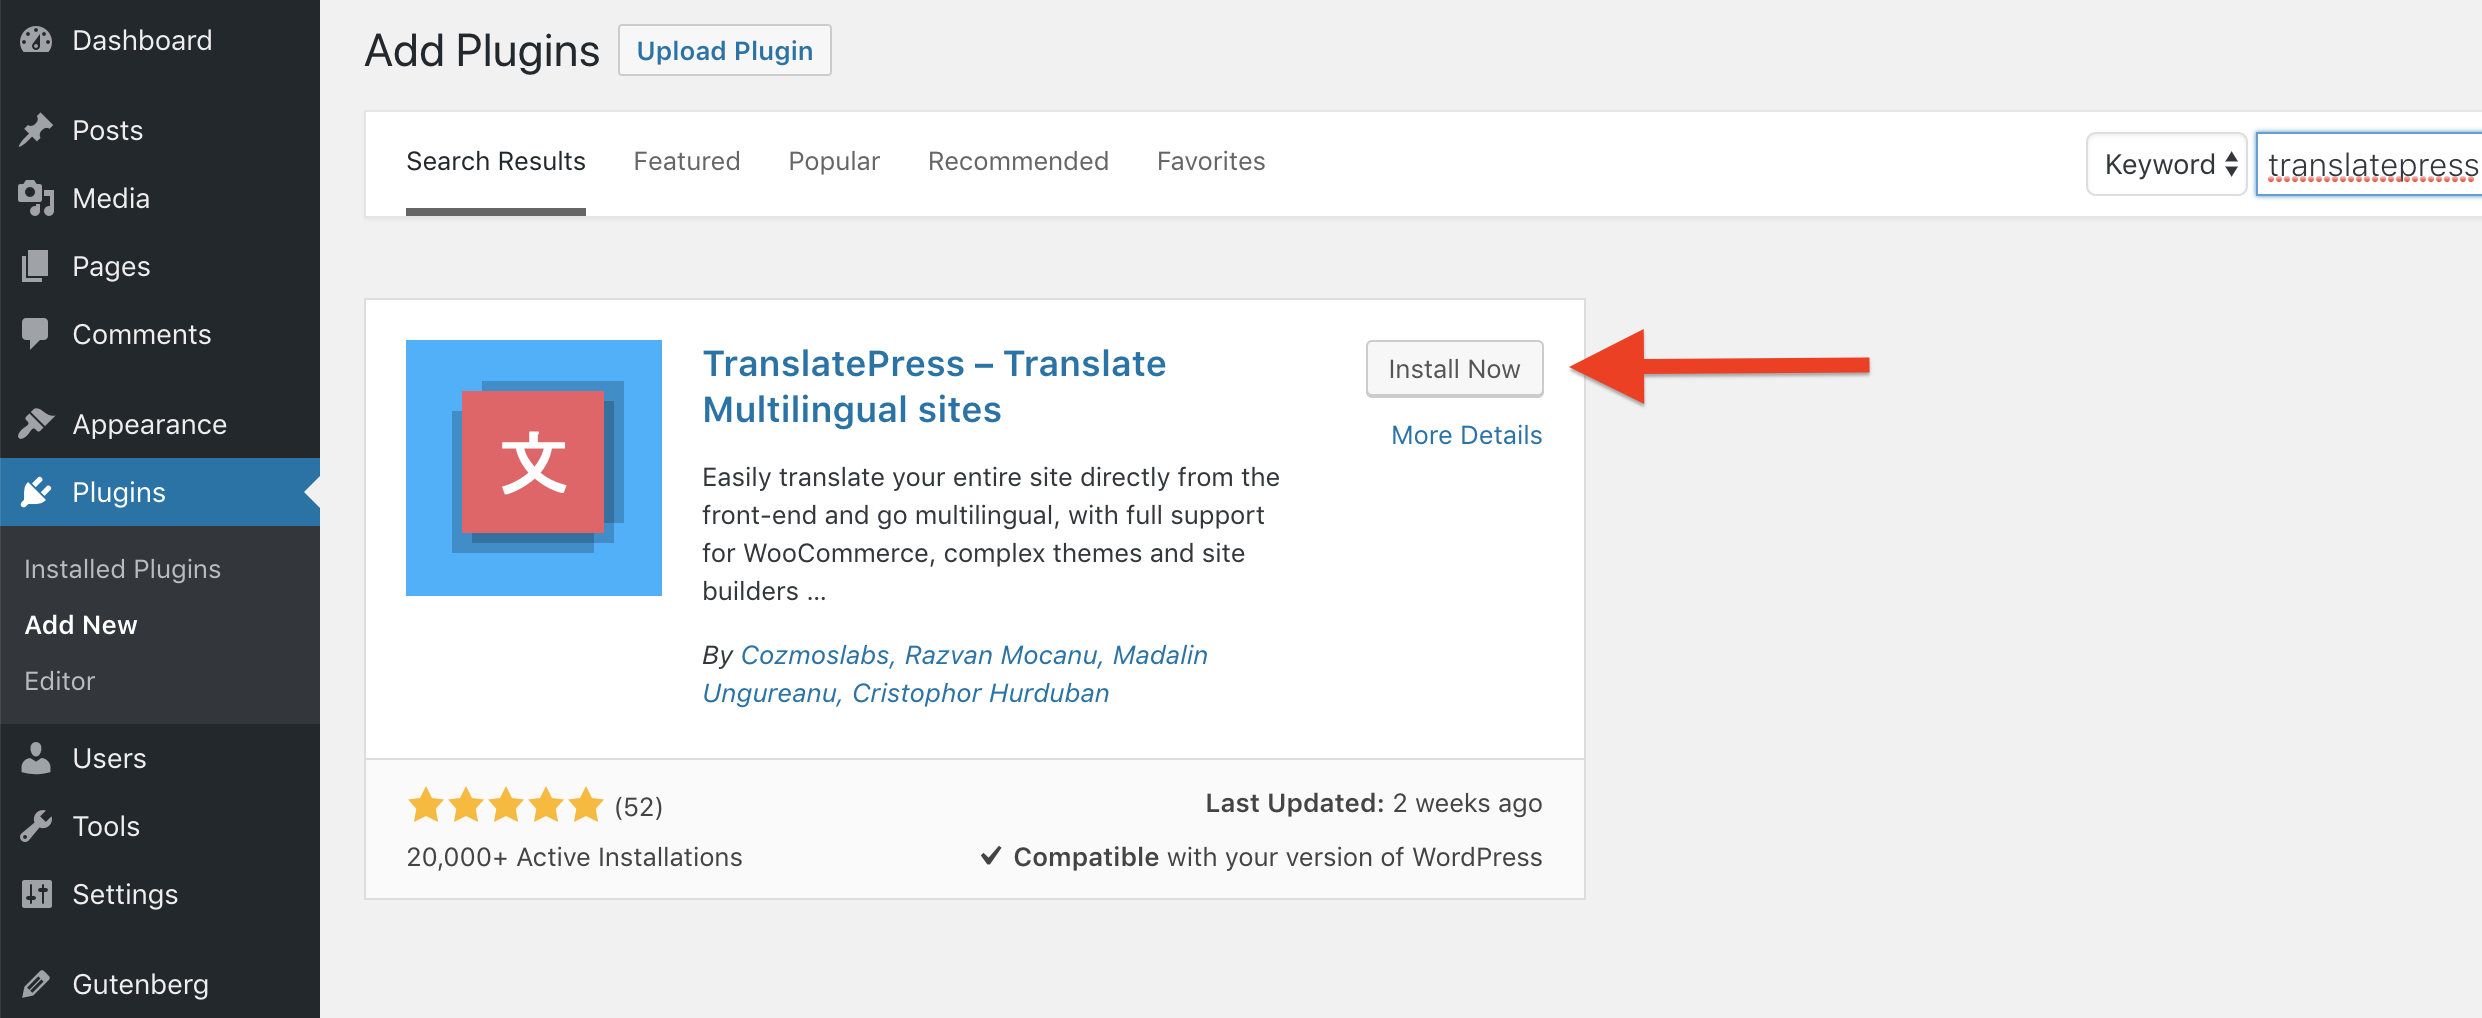 install TranslatePress by searching for it in the WordPress Dashboard > Plugins interface